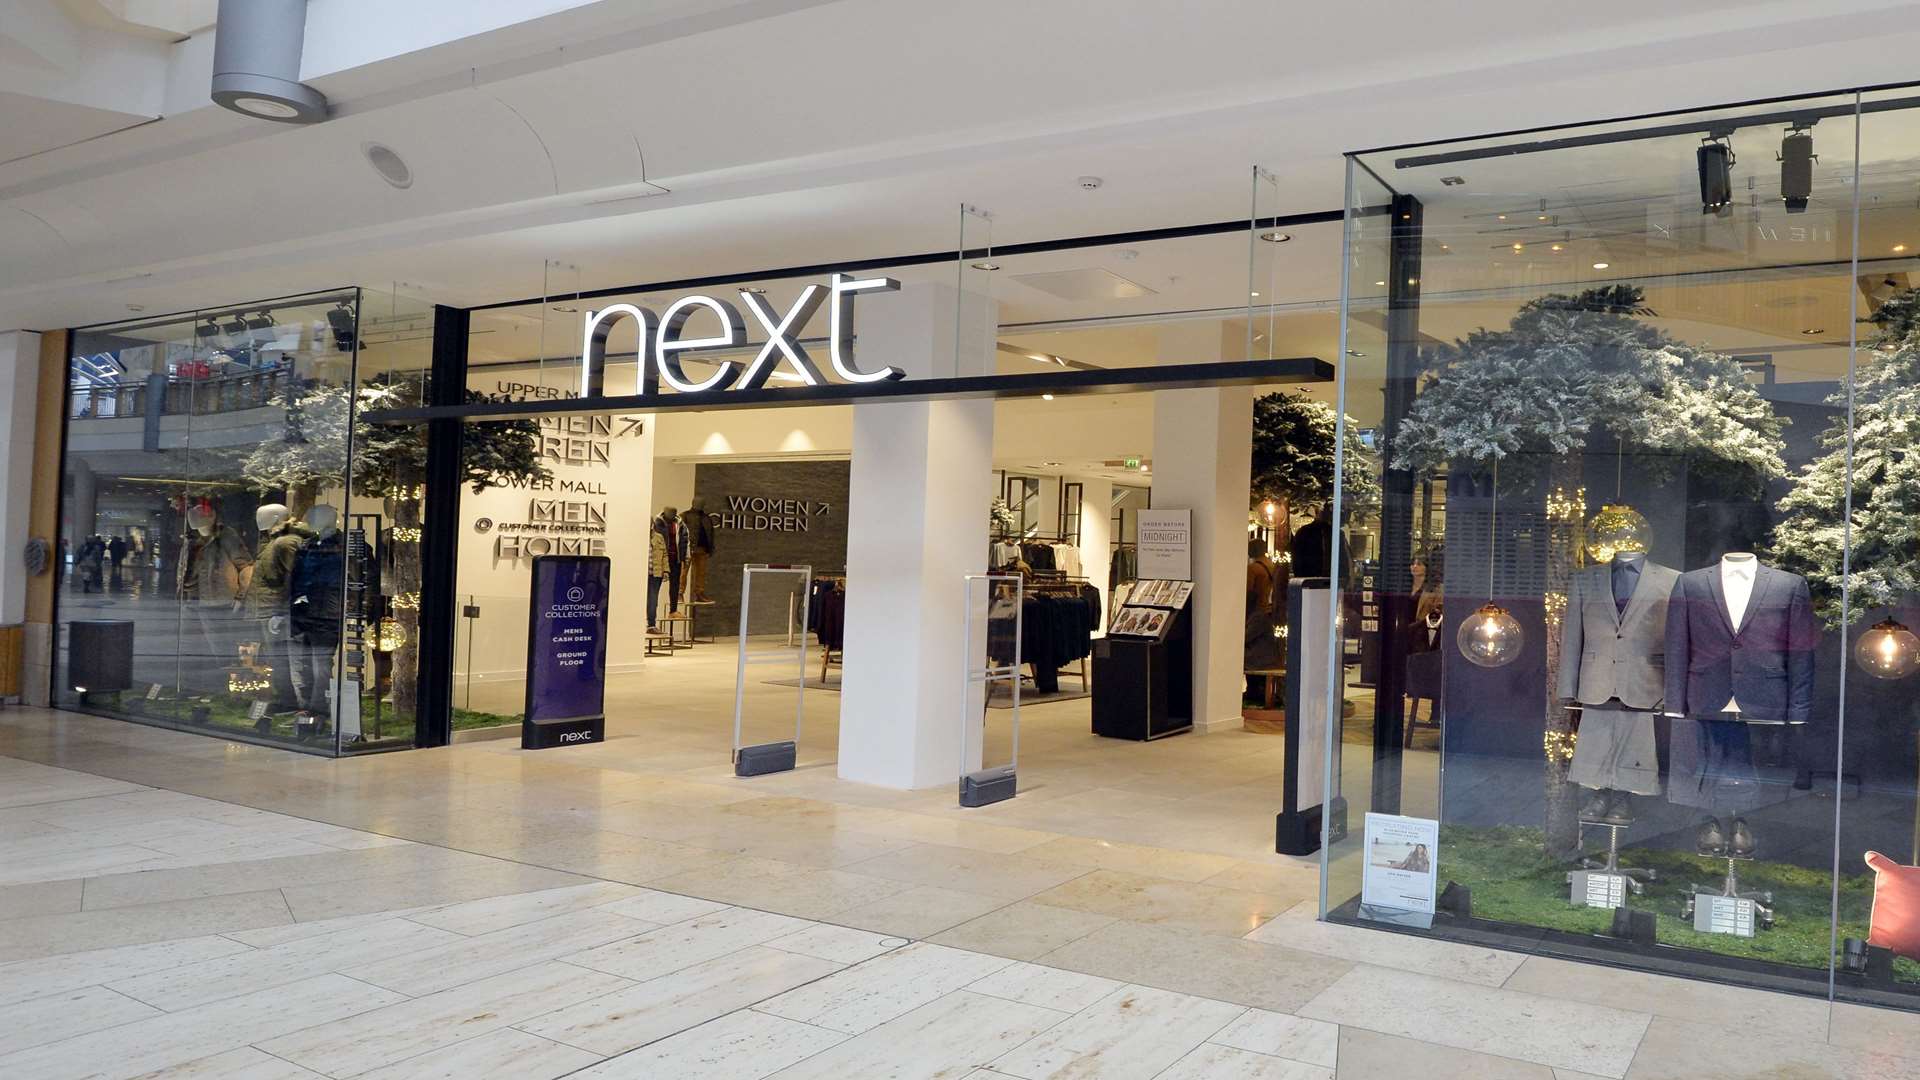 The expanded Next store in Bluewater has fully reopened